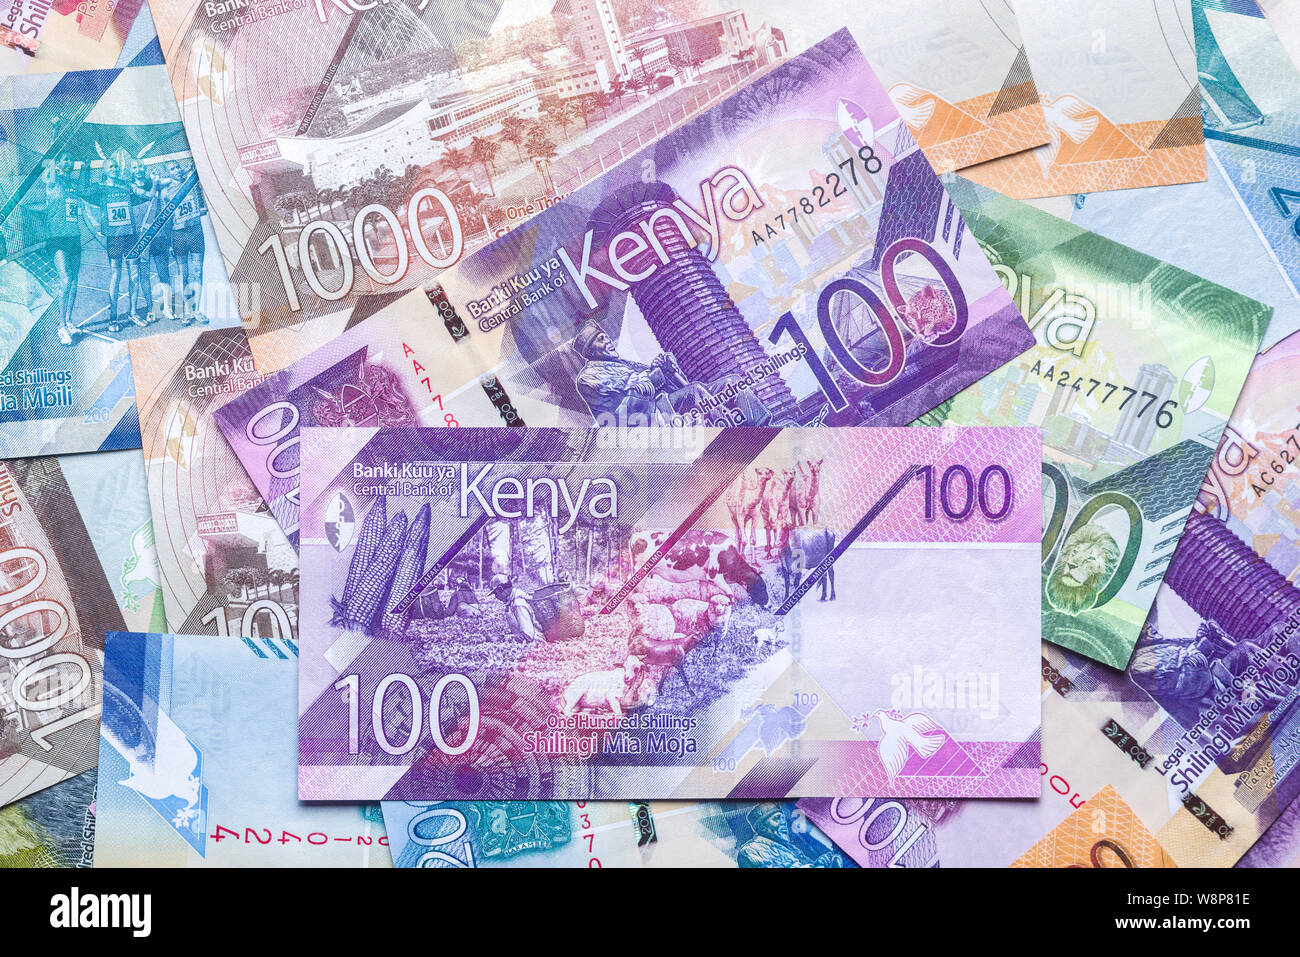 New 2019 Kenyan 100 Shilling bank notes on top of other bank notes in various denominations Stock Photo